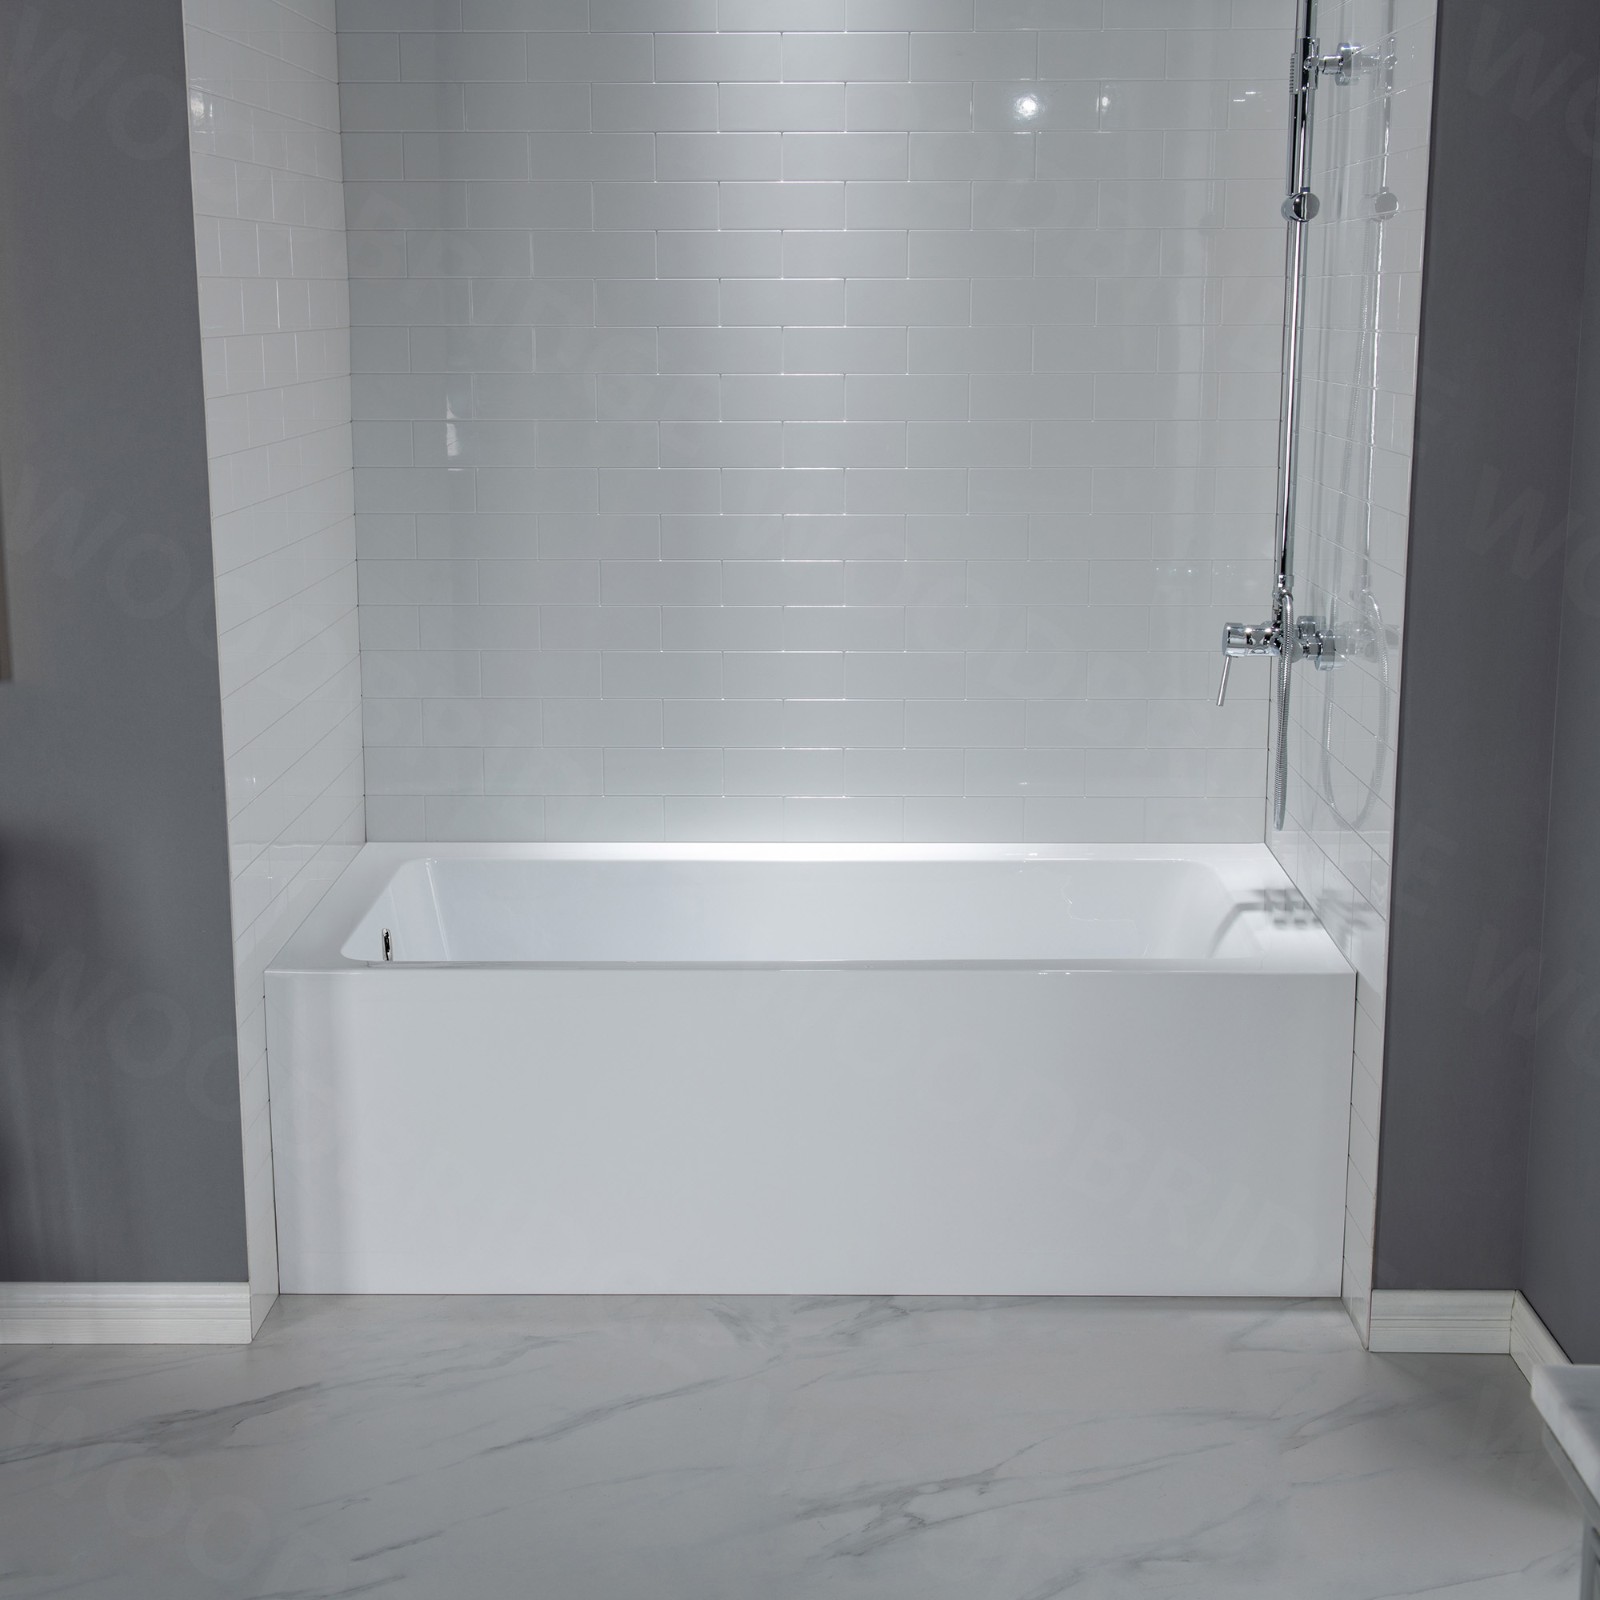  WOODBRIDGE 60-Inch Contemporary Alcove Acrylic Bathtub with Left Hand Drain and Overflow Holes, White_9209